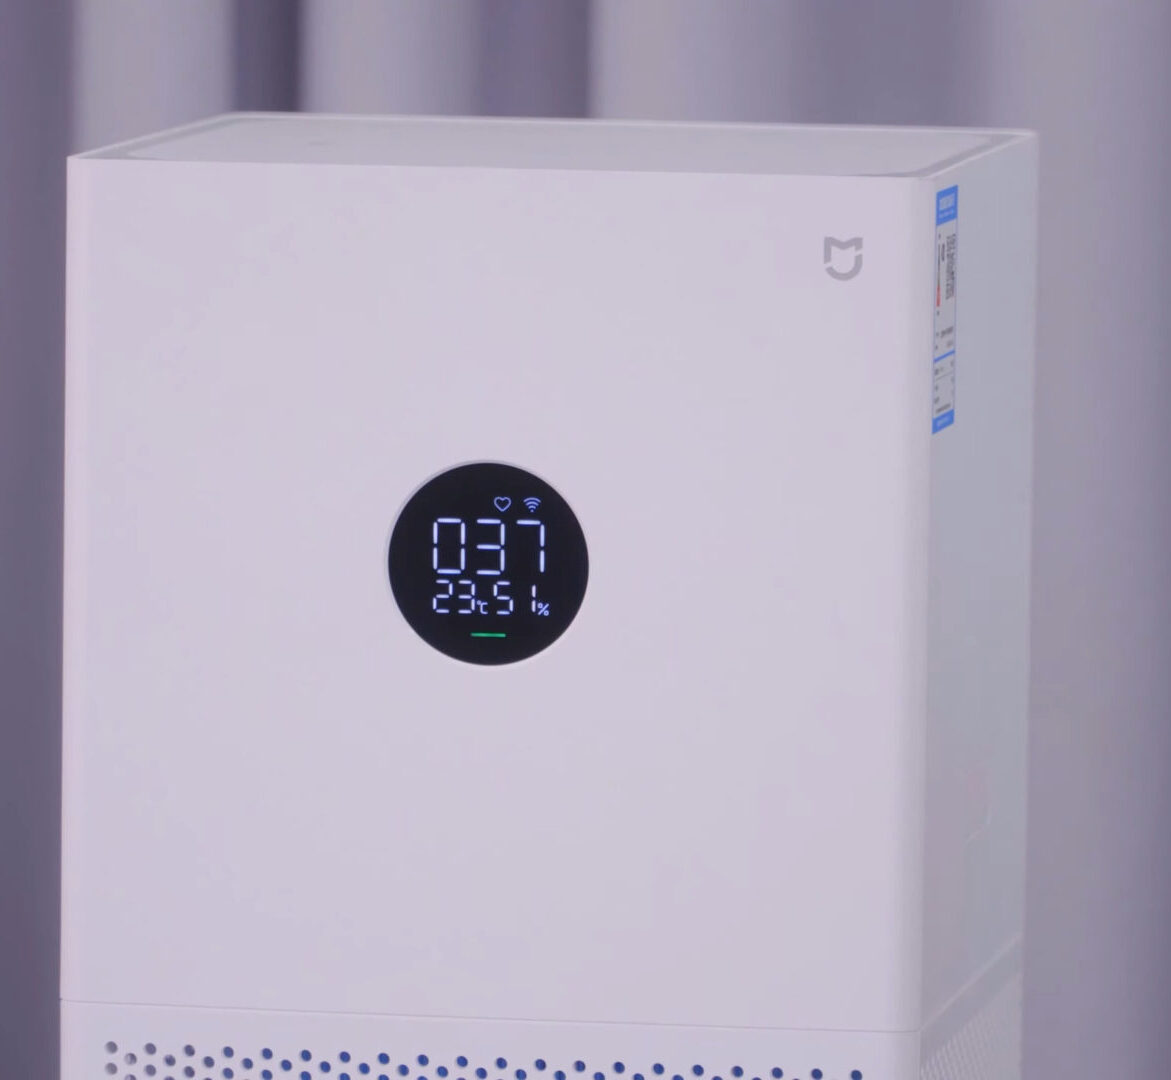 You can pair The Mijia Air Purifier 4 Lite with your phone.